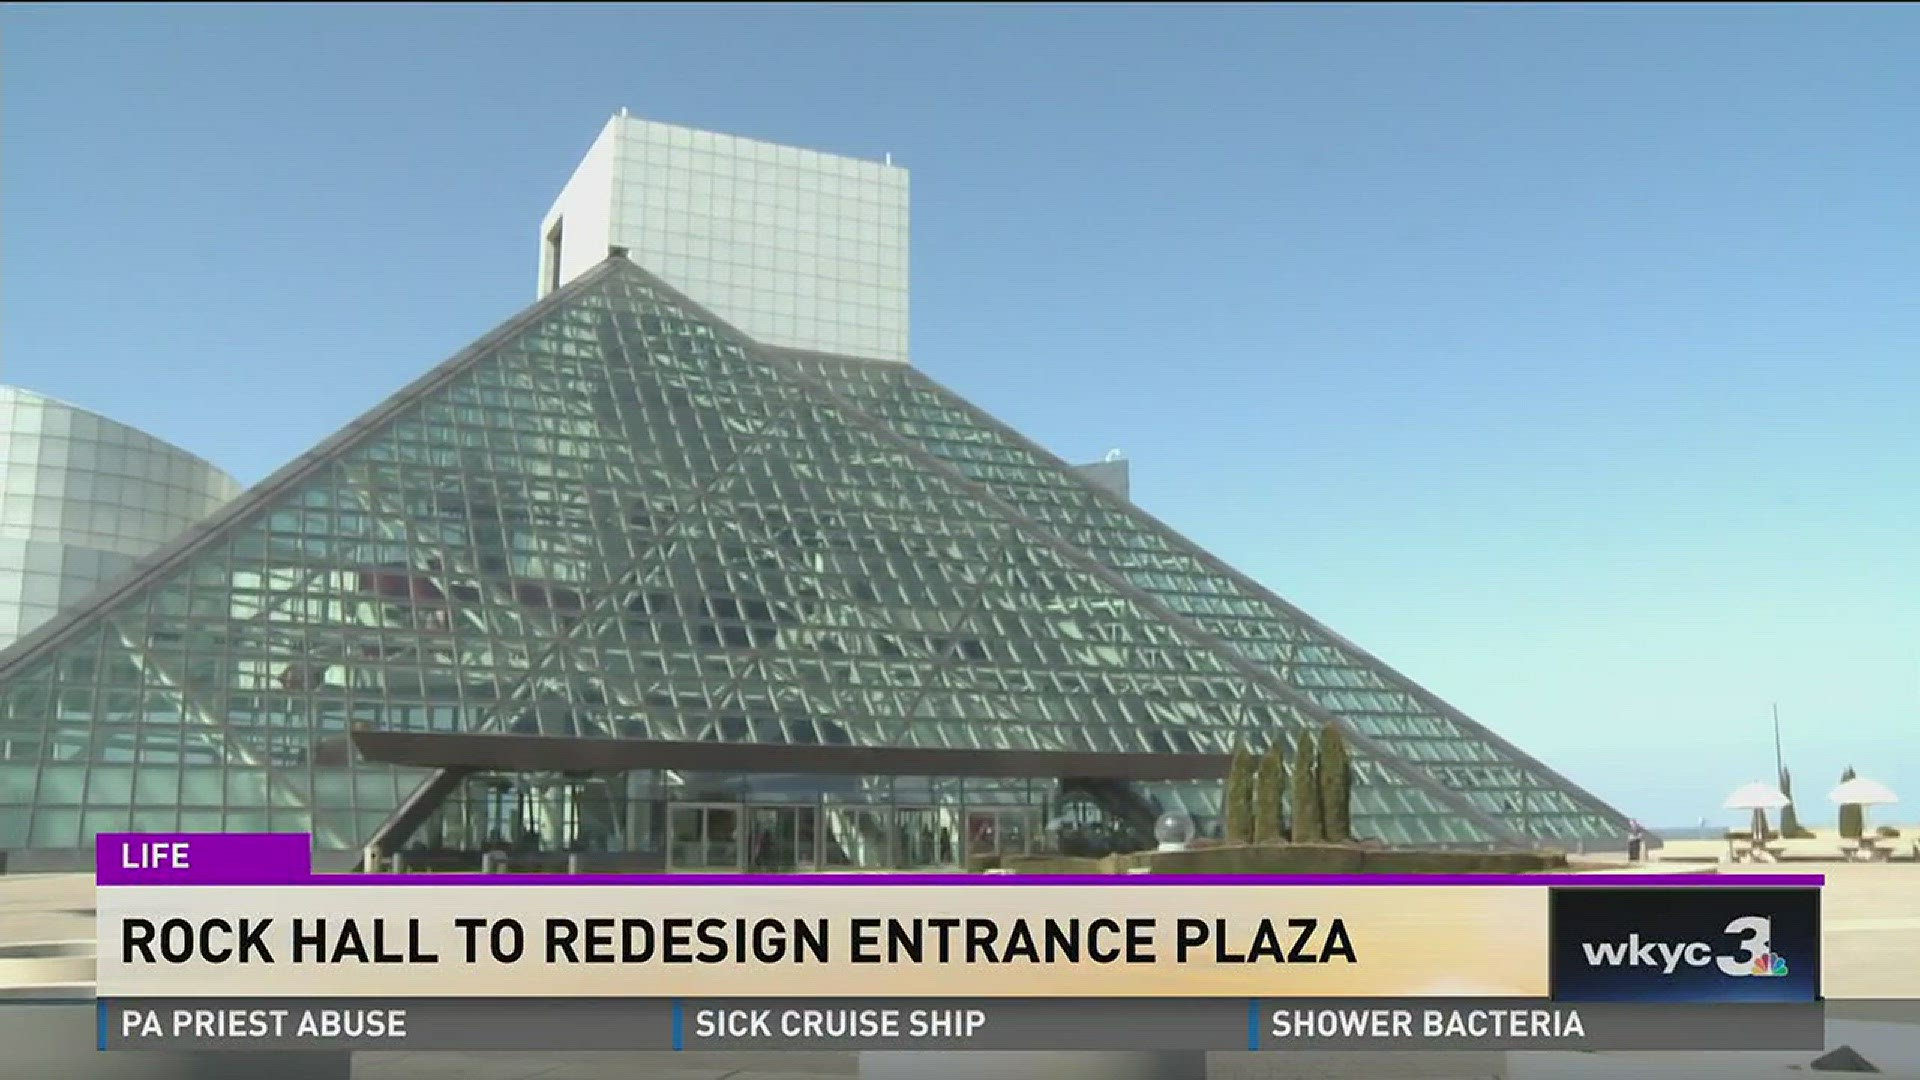 March 2, 2016: The Rock and Roll Hall of Fame has revealed it is redeveloping its entry plaza with an outdoor cafe, motorcycle parking and a new stage.